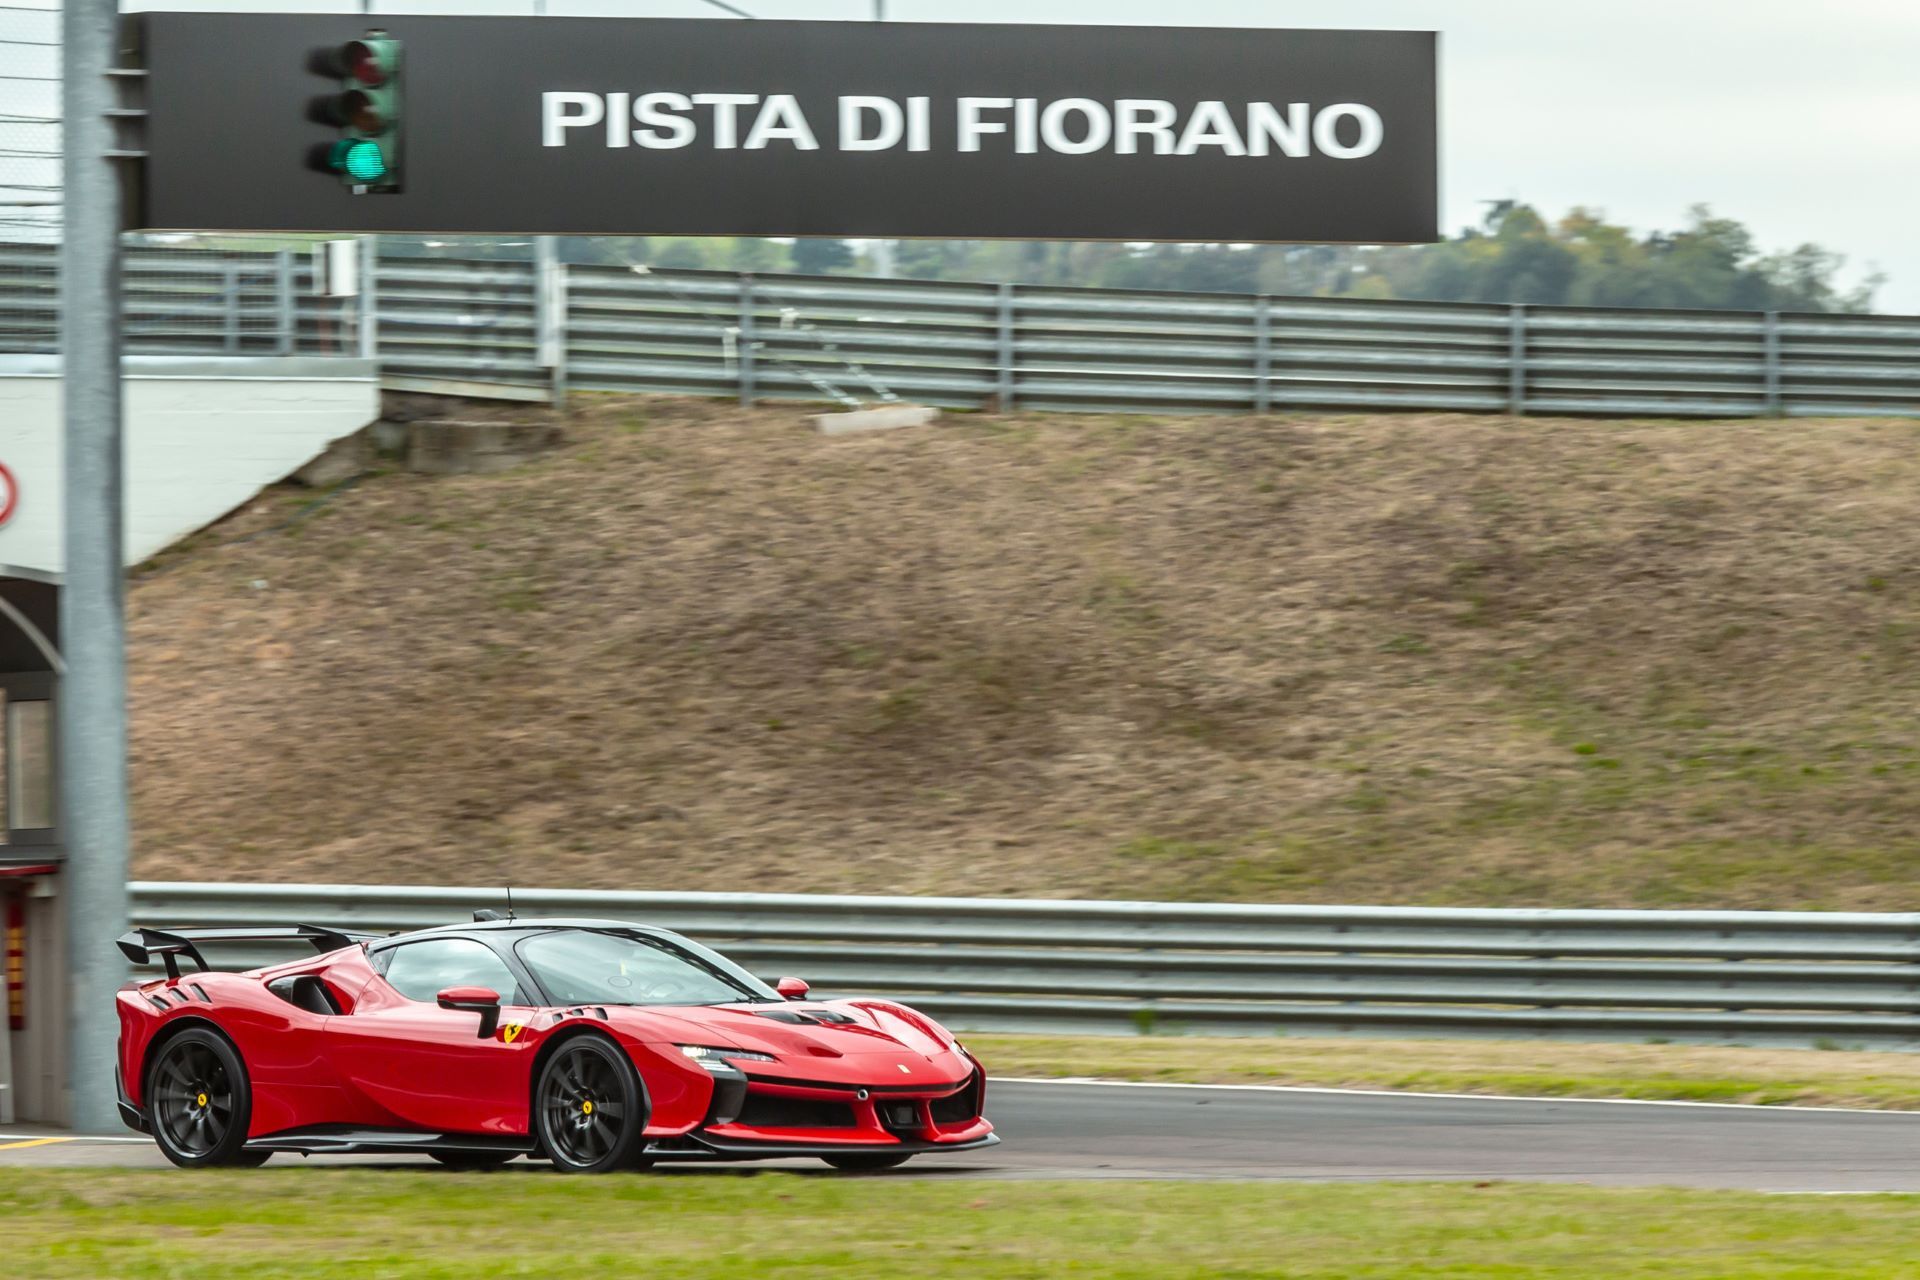 The Ferrari SF90 XX Stradale sets a 1’ 17.309” lap record at Fiorano for a road-going car